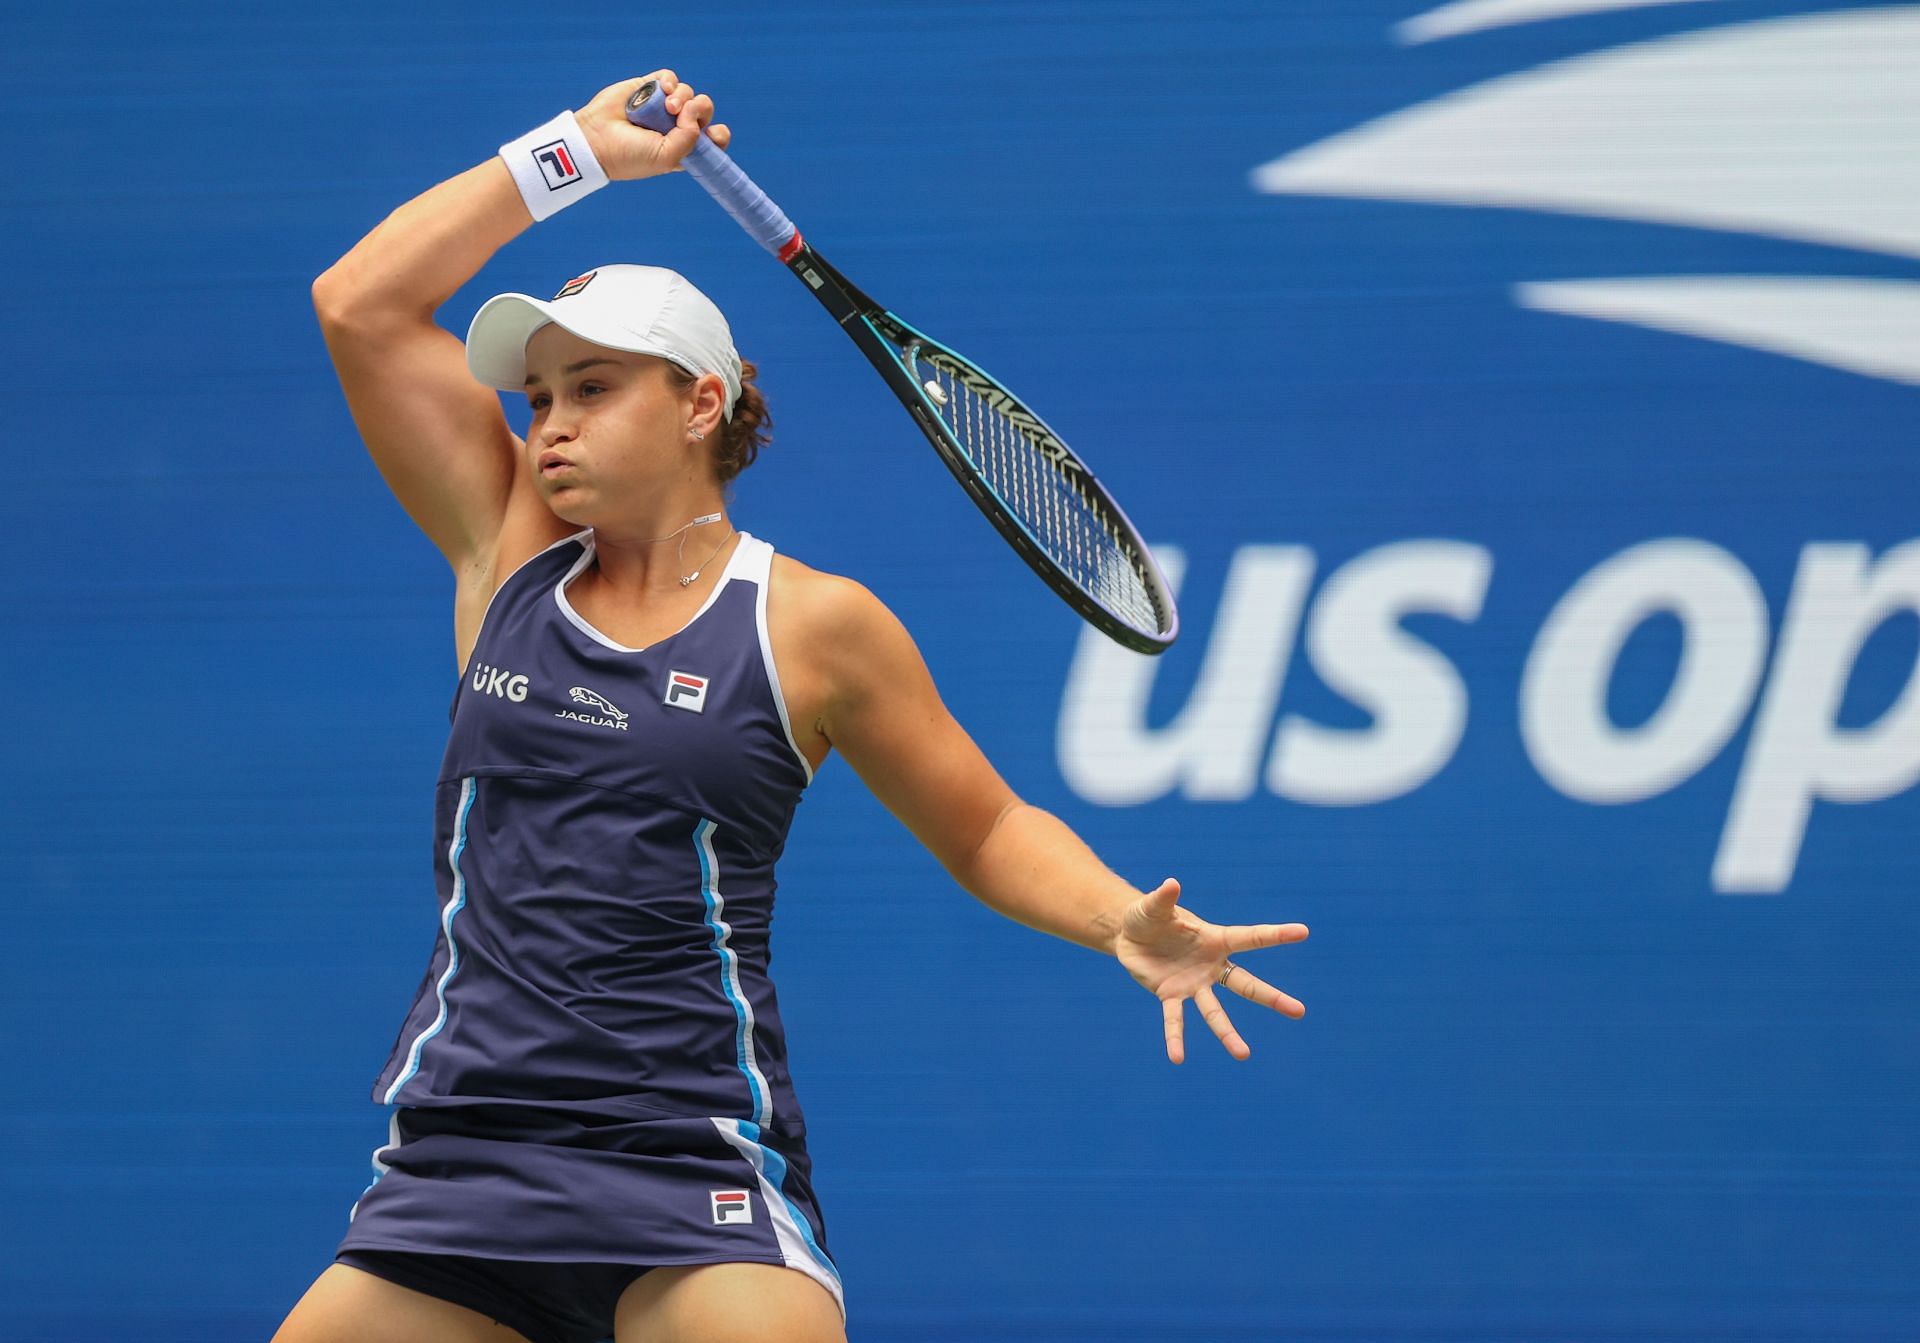 Ashleigh Barty at the 2021 US Open